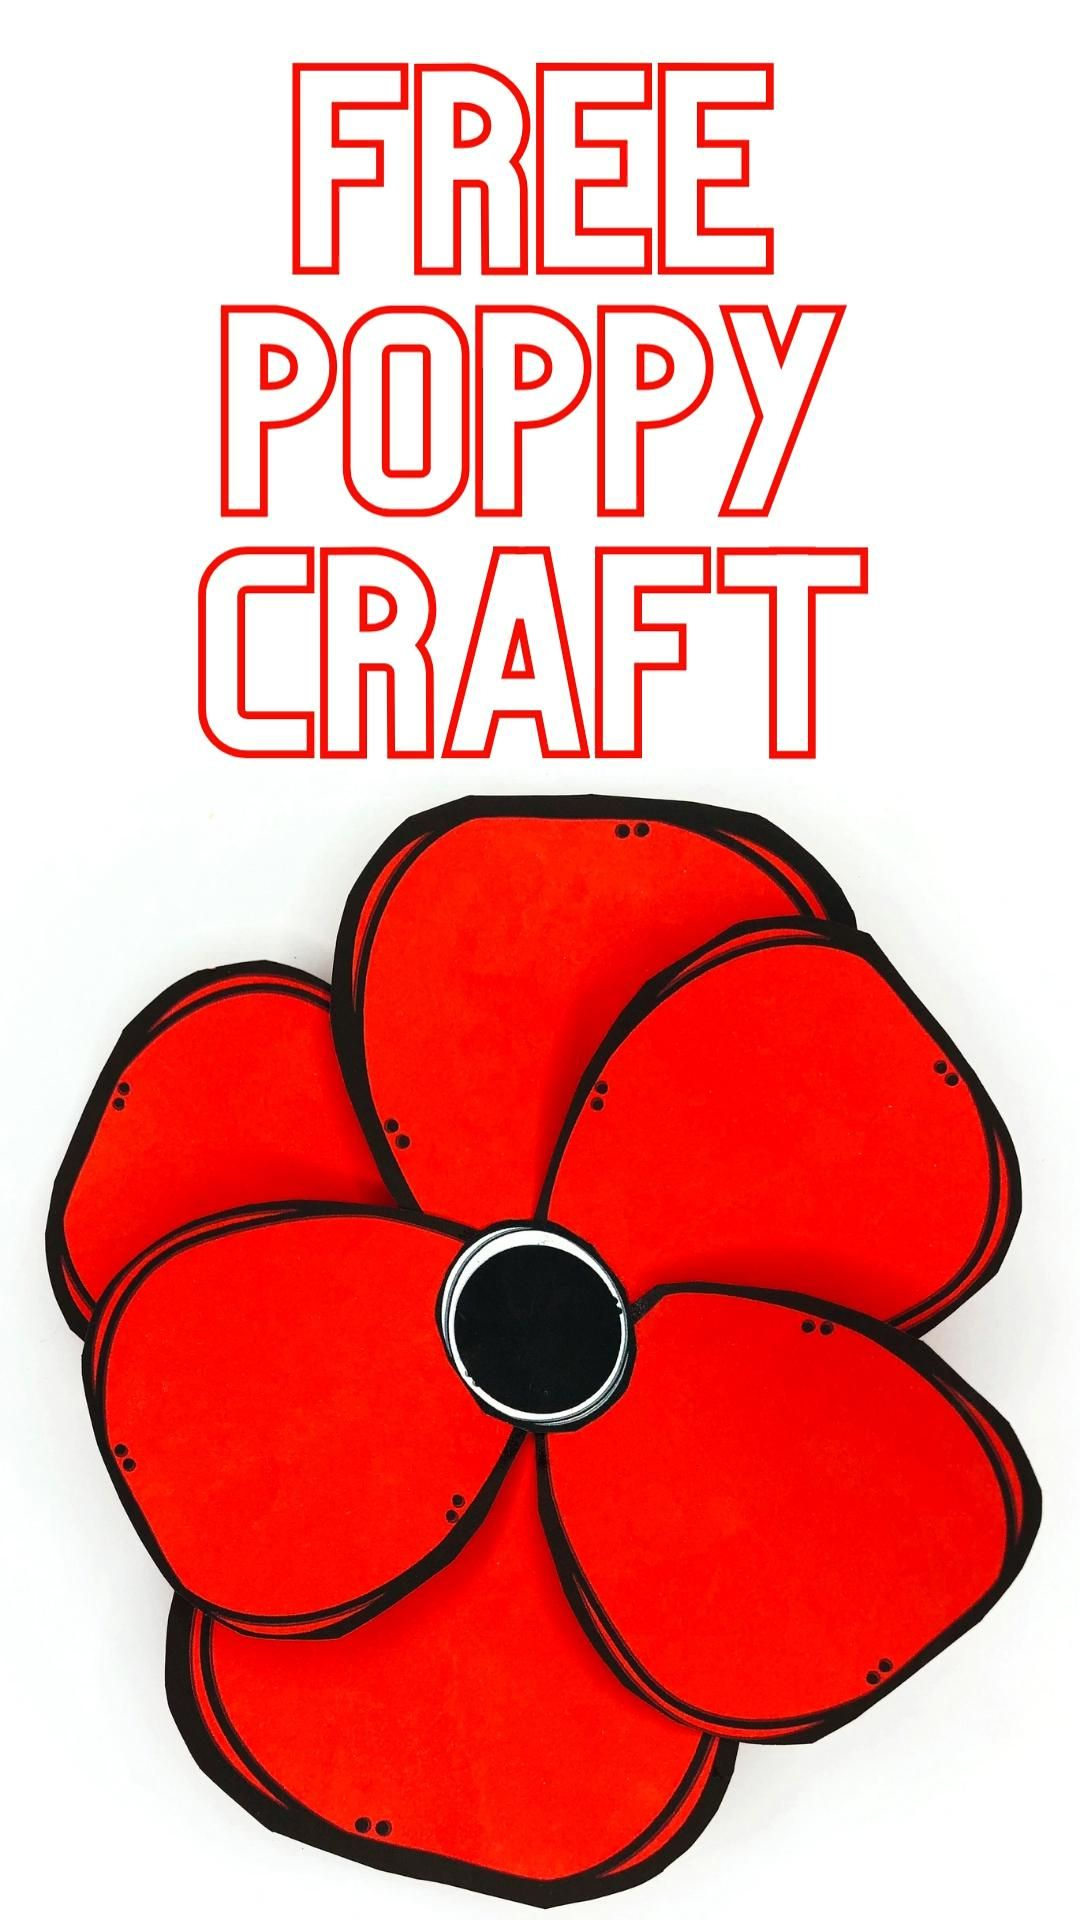 Beautiful Poppy Template Ideas For Crafts And Decor - Free Printable Poppy Images